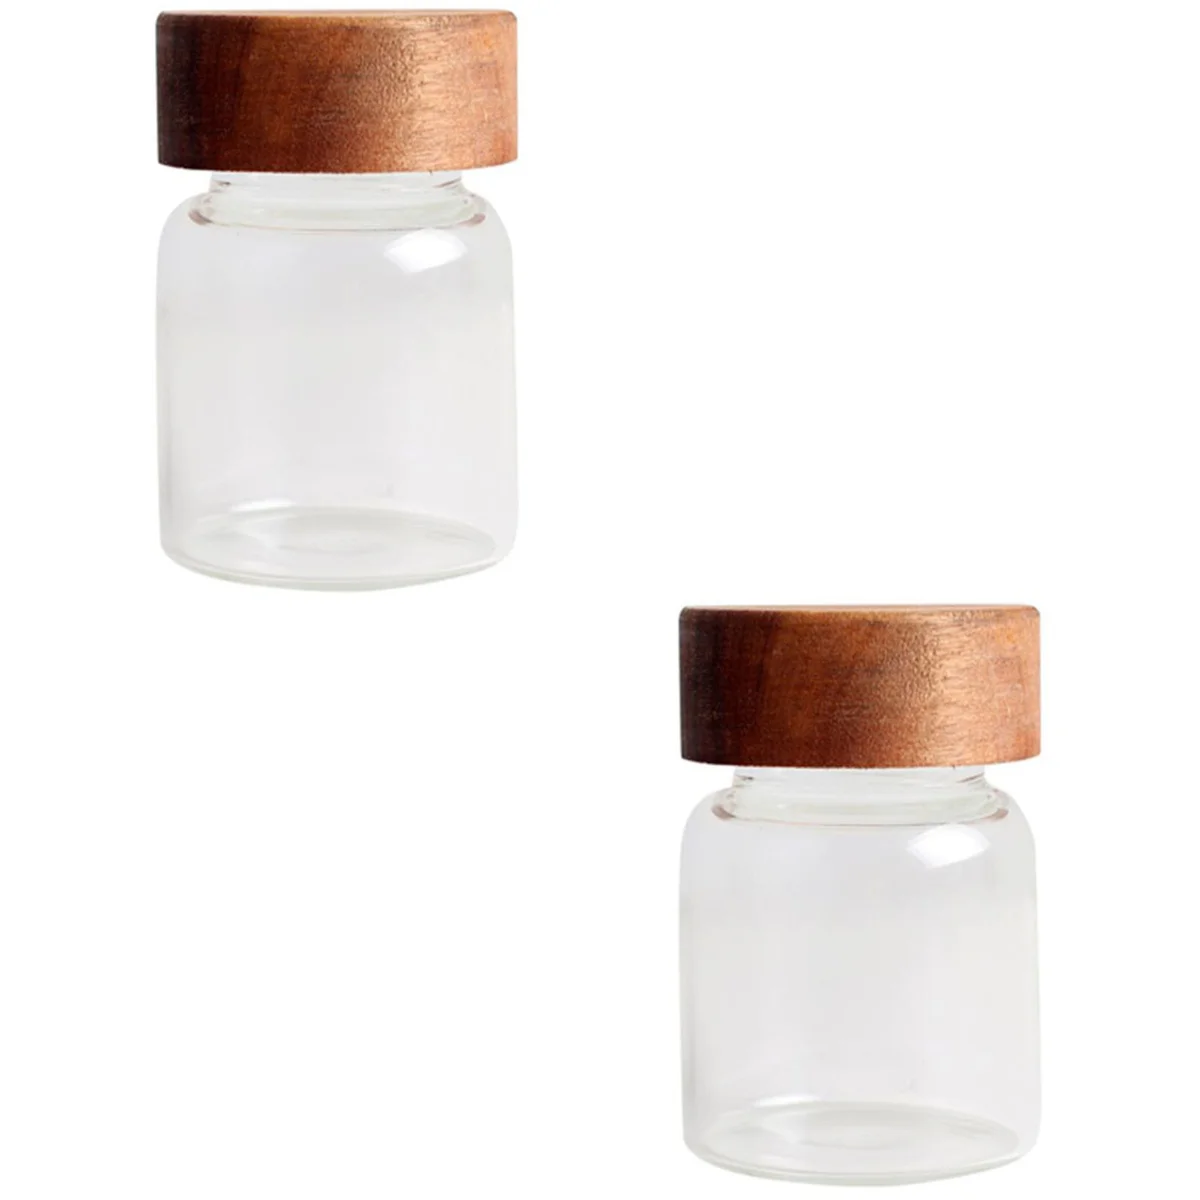 

2pcs Round Honey Canister Food Sealed Storage Container Practical Glass Jar Empty Storage Bottle for Loose Tea Coffee Bean